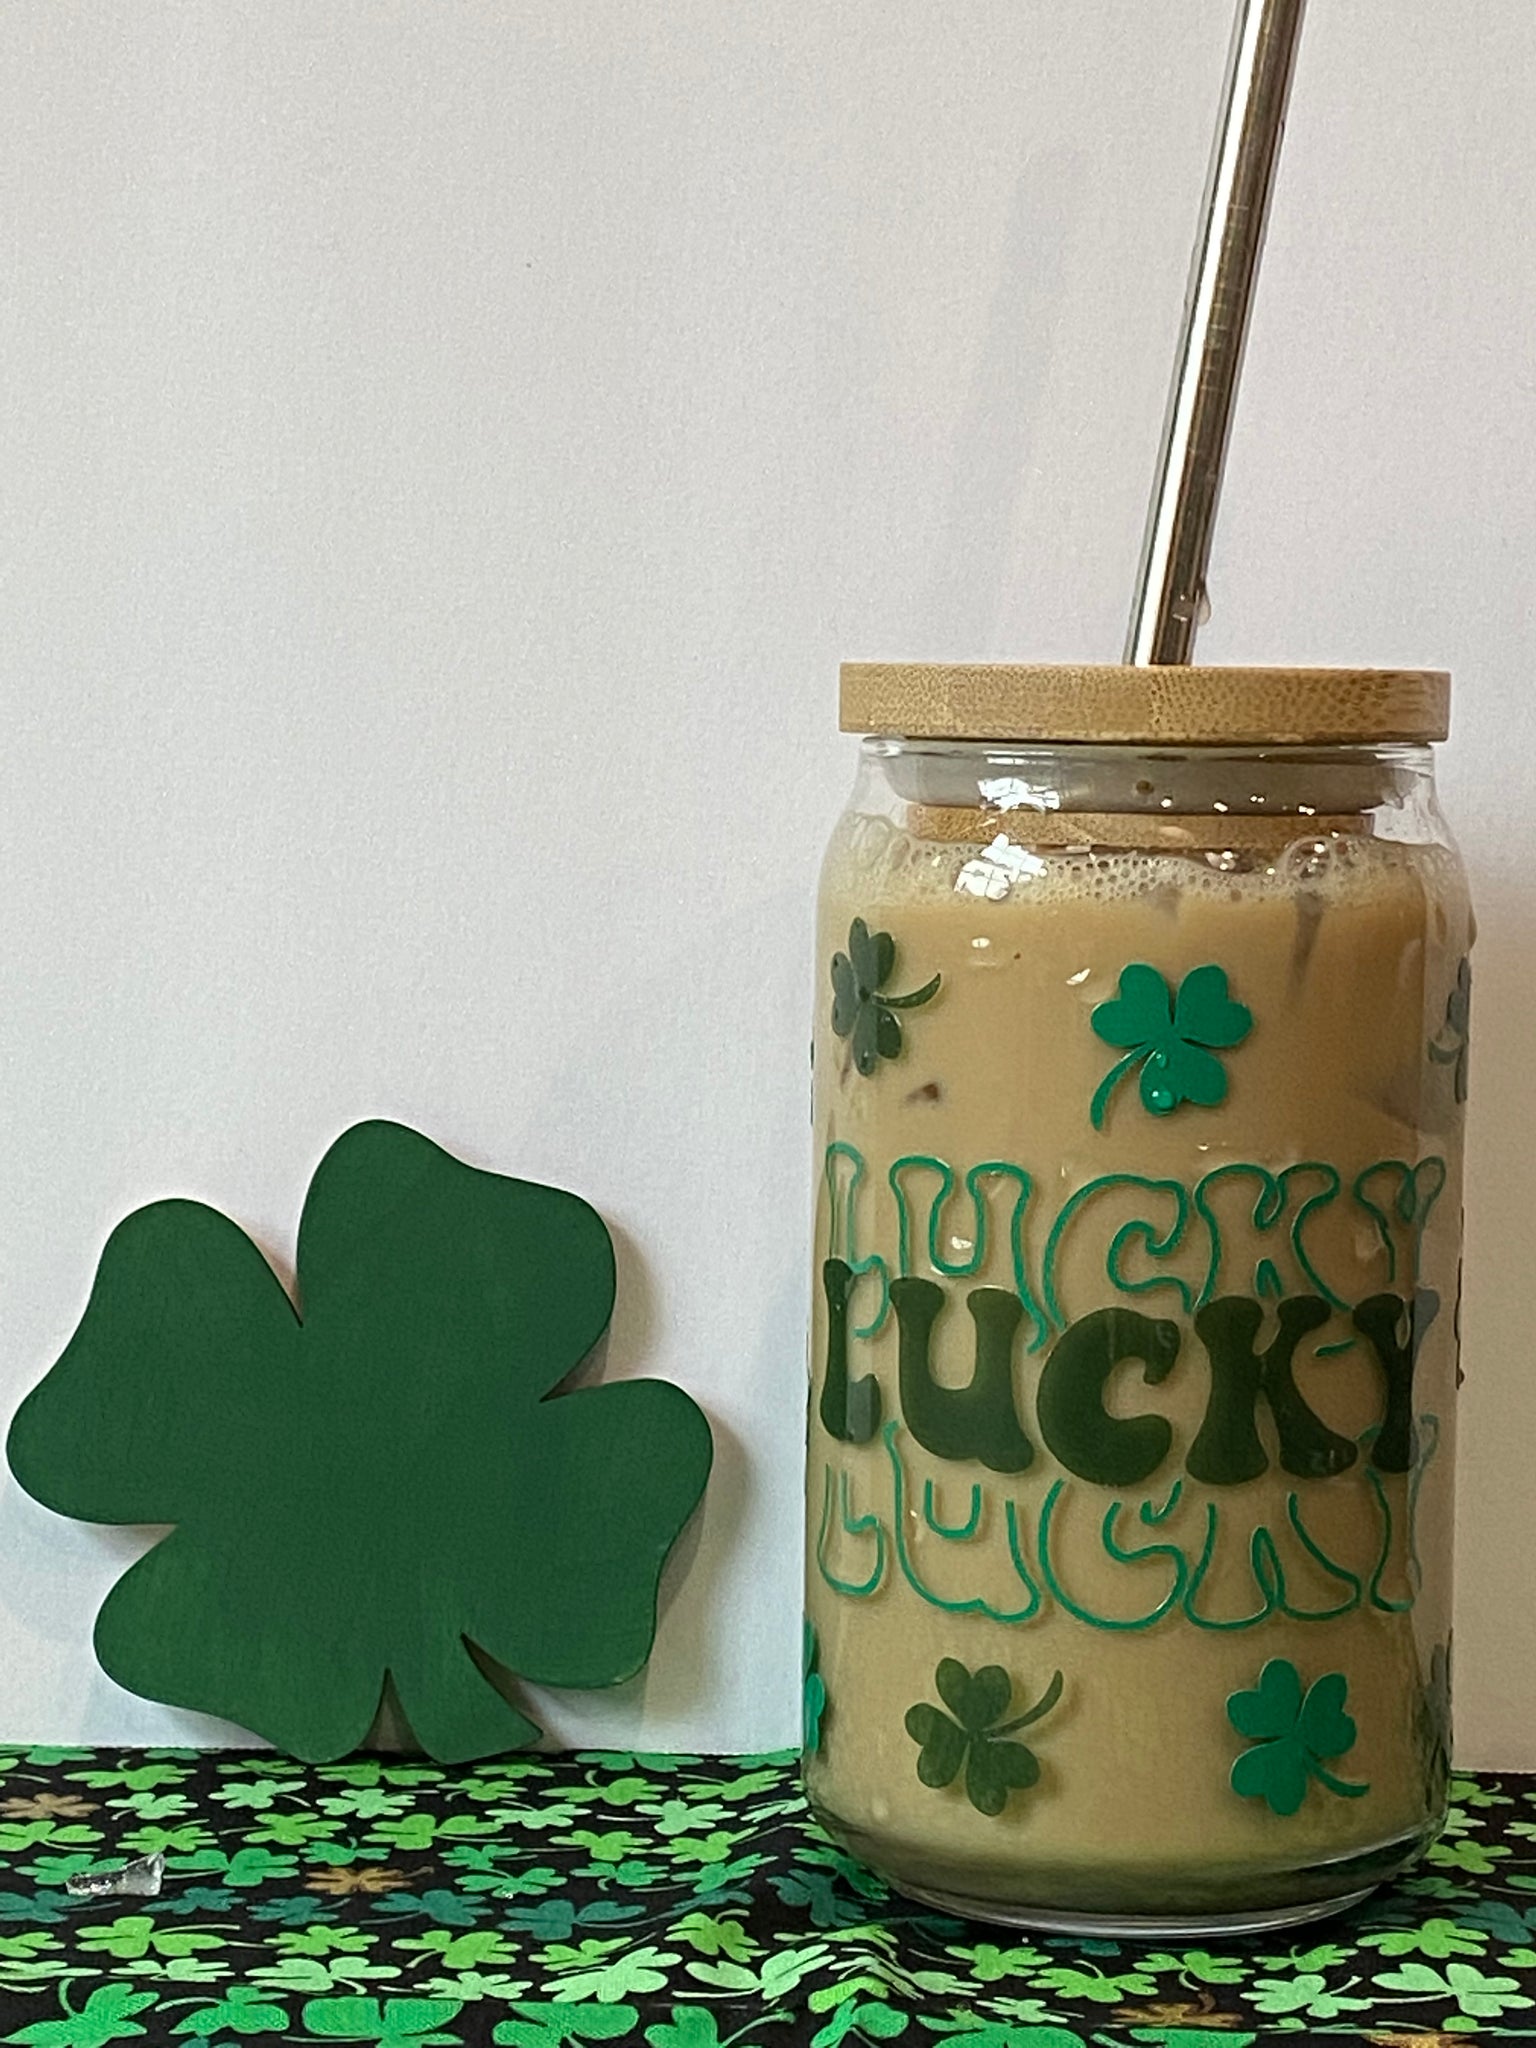 Lucky Shamrock 16oz Libbey Beer Can Glass w/ Color Change Vinyl